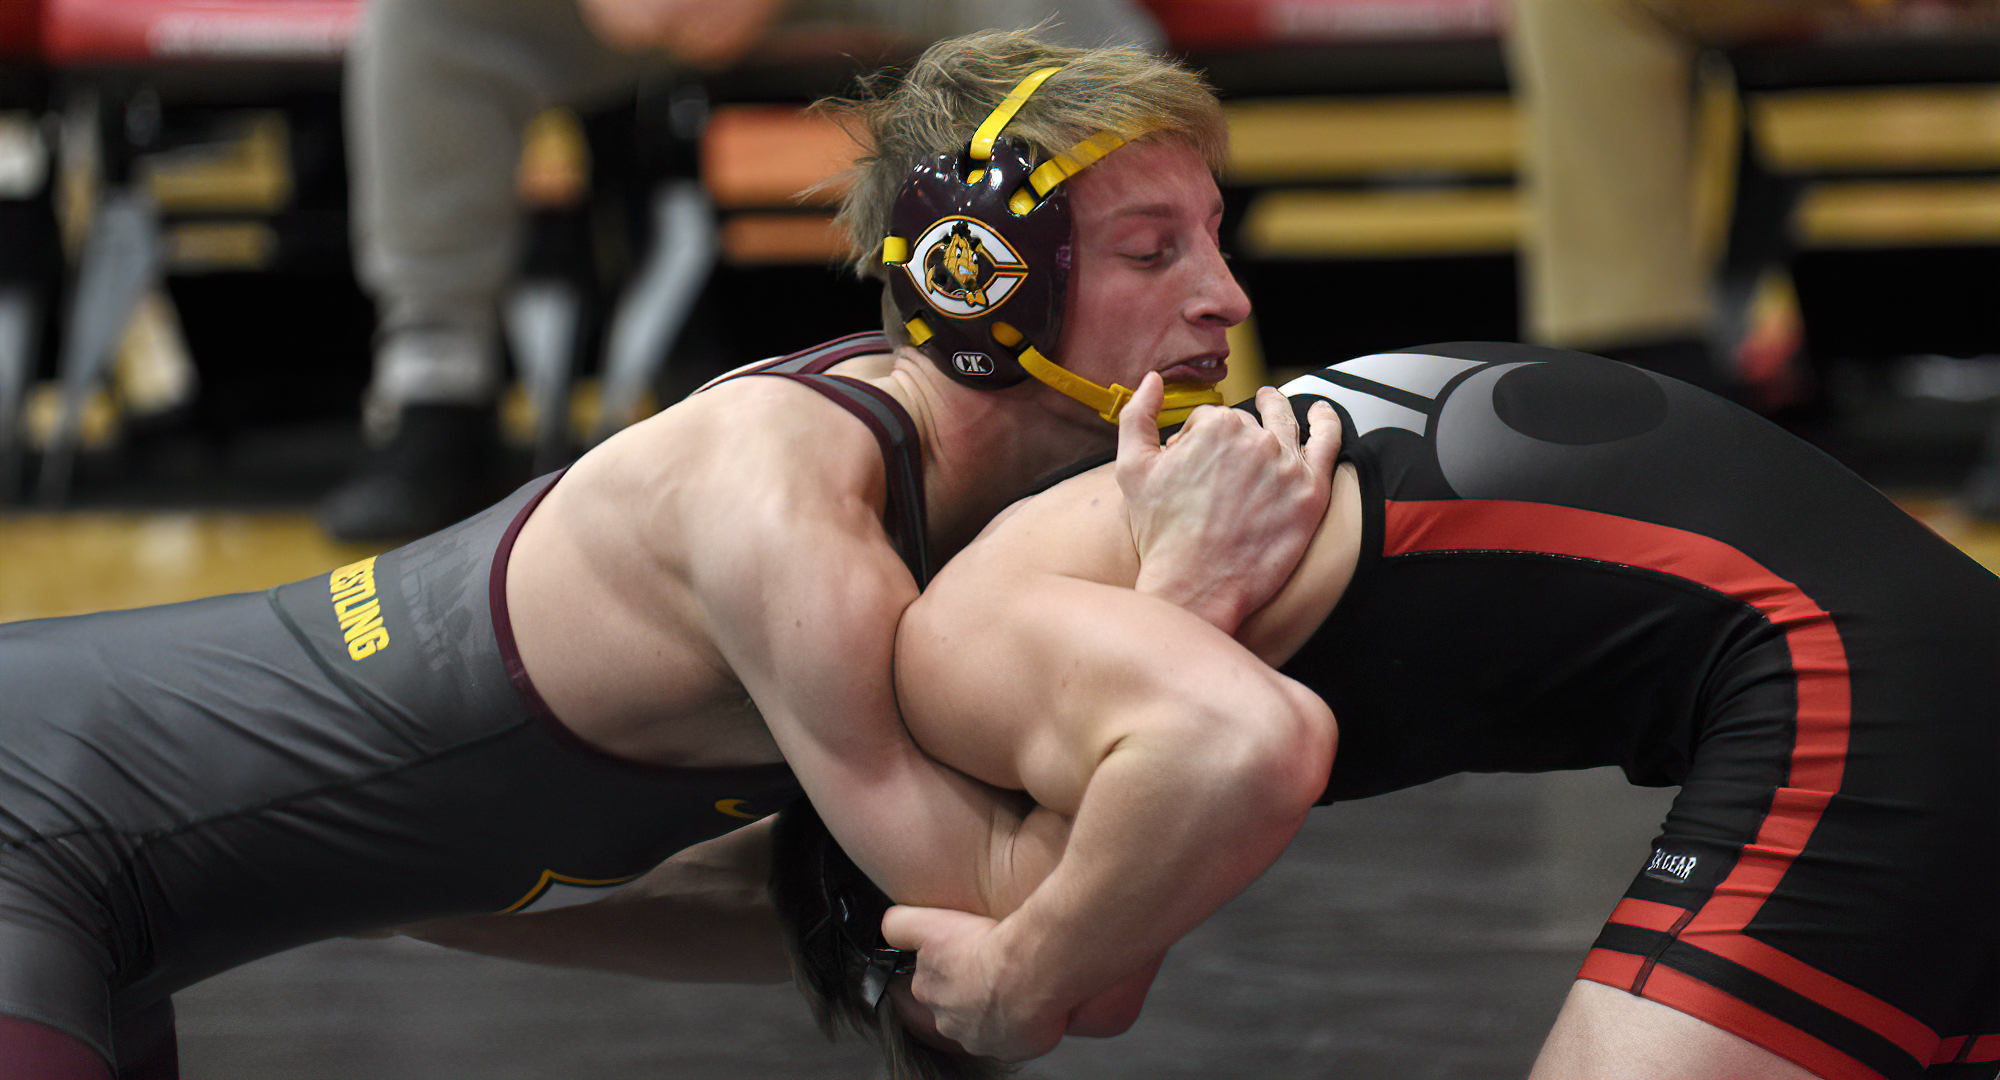 Kellen Schauer was one of seven Cobbers to earn contested wins in the team's 50-0 win at Jamestown. Schauer claimed a 6-4 win at 149.